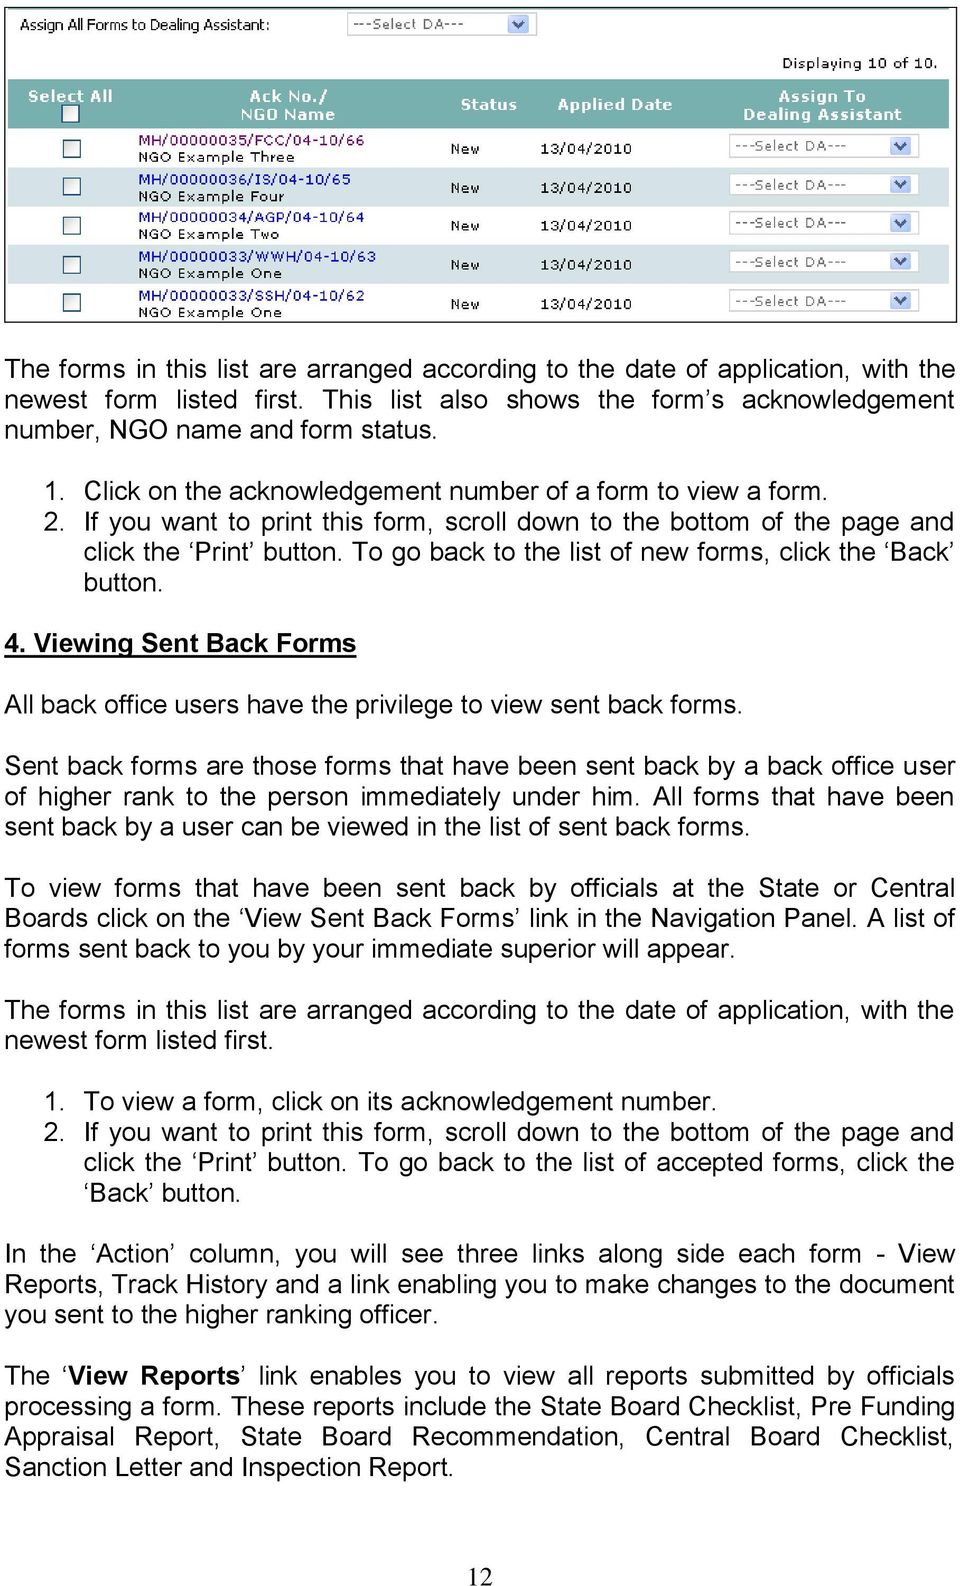 To go back to the list of new forms, click the Back button. 4. Viewing Sent Back Forms All back office users have the privilege to view sent back forms.